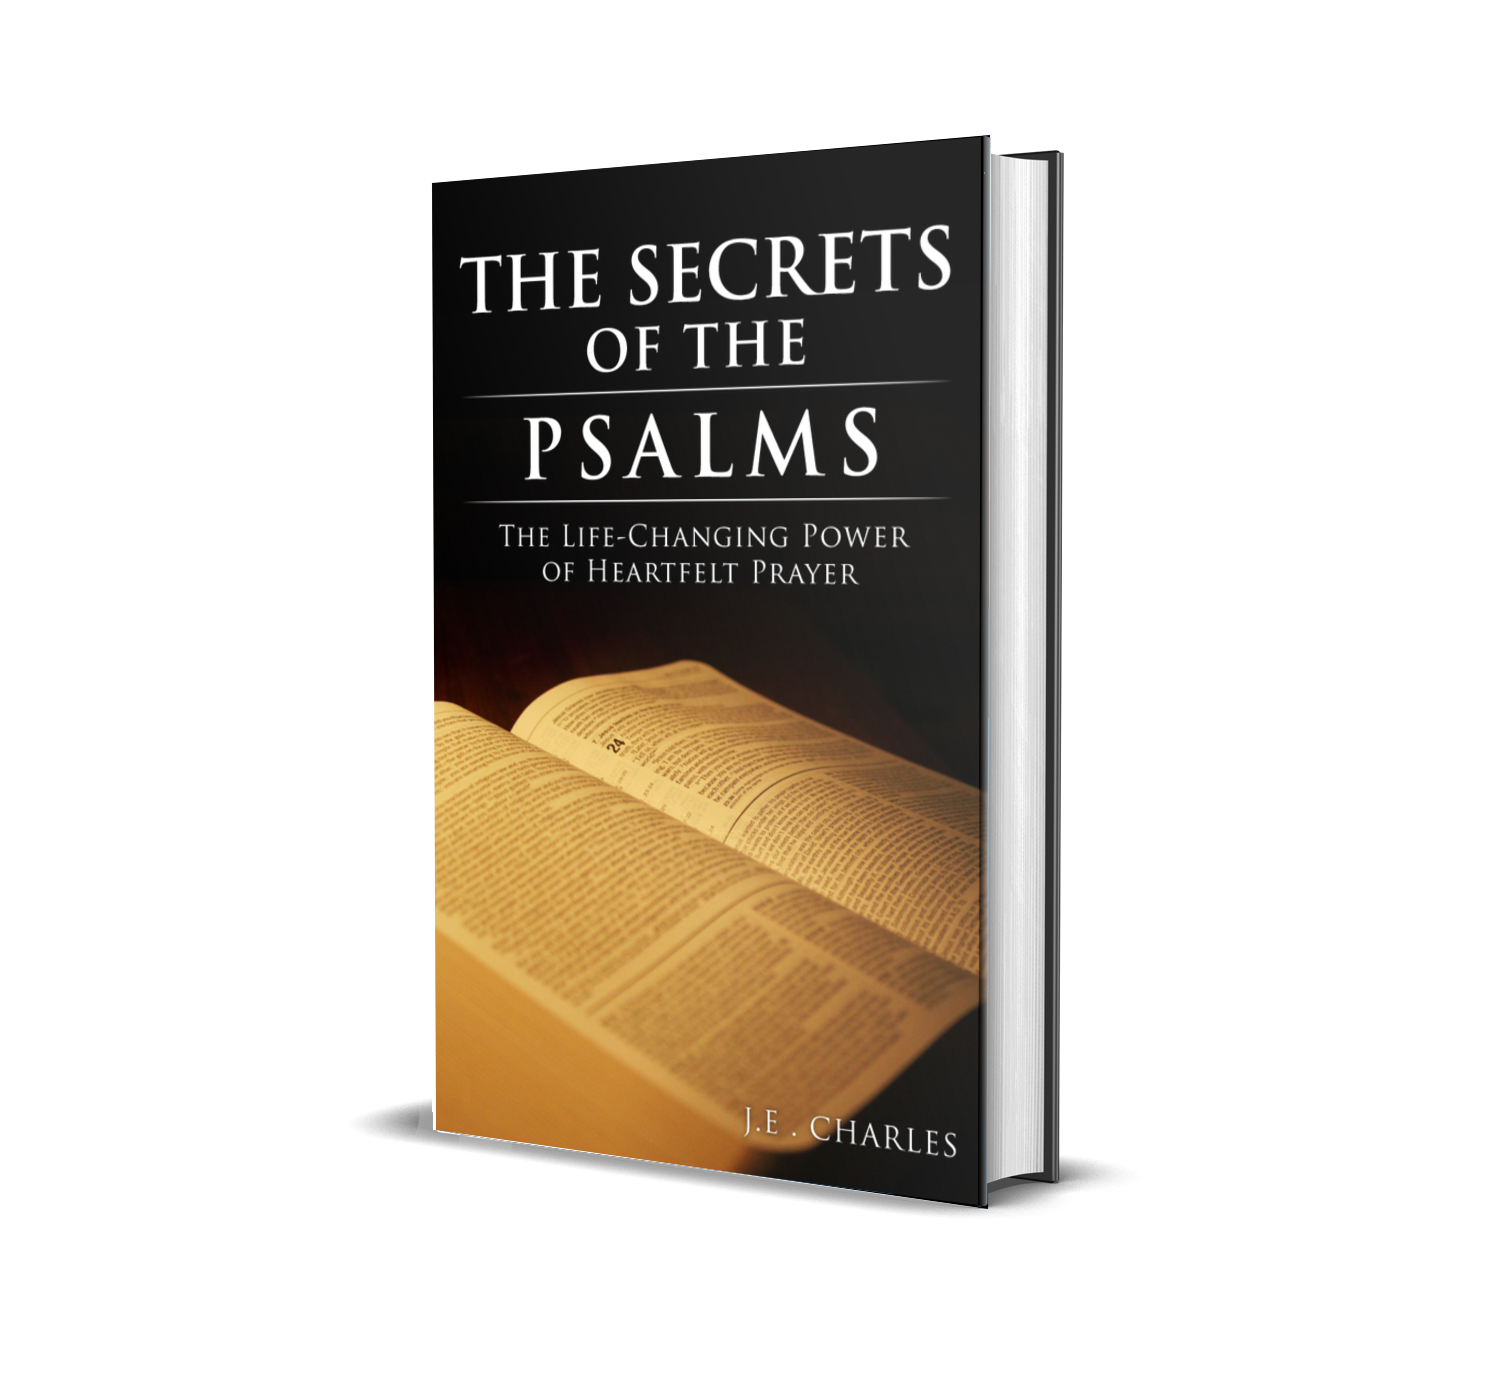 The Secrets of the Psalms: The Life-Changing Power of Heartfelt Prayer